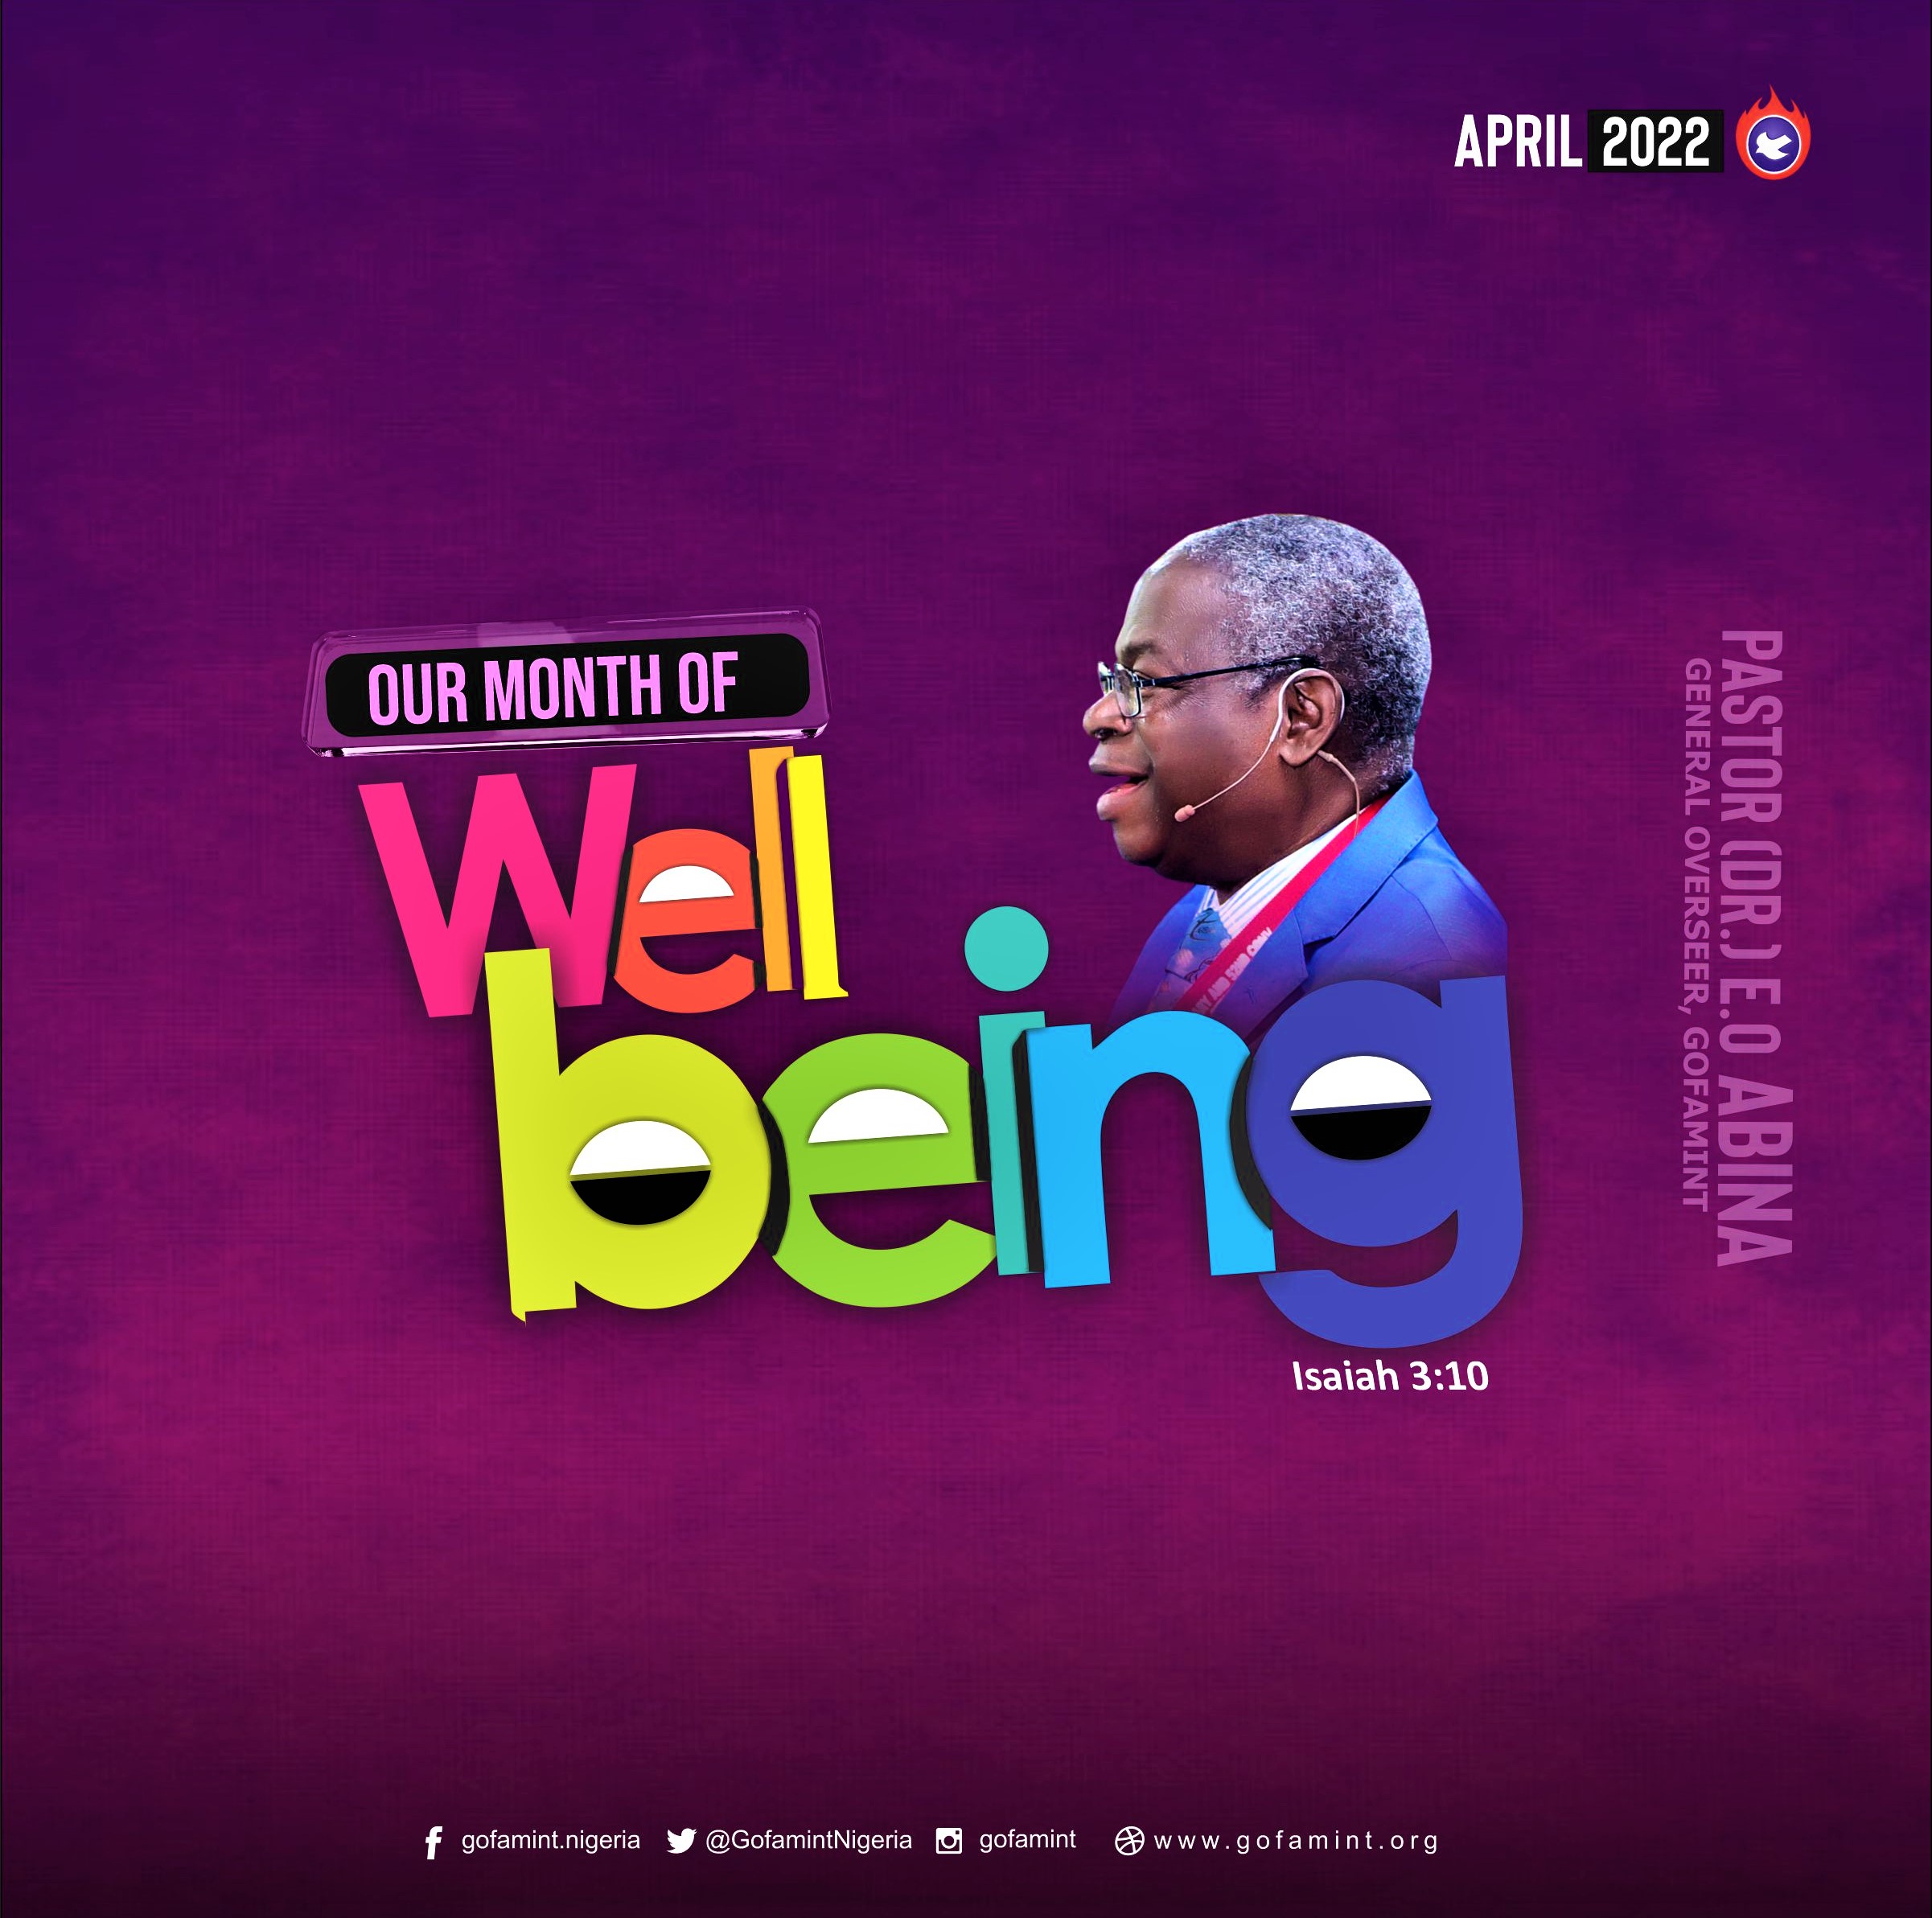 WELCOME TO APRIL 2022 – OUR MONTH OF WELL-BEING